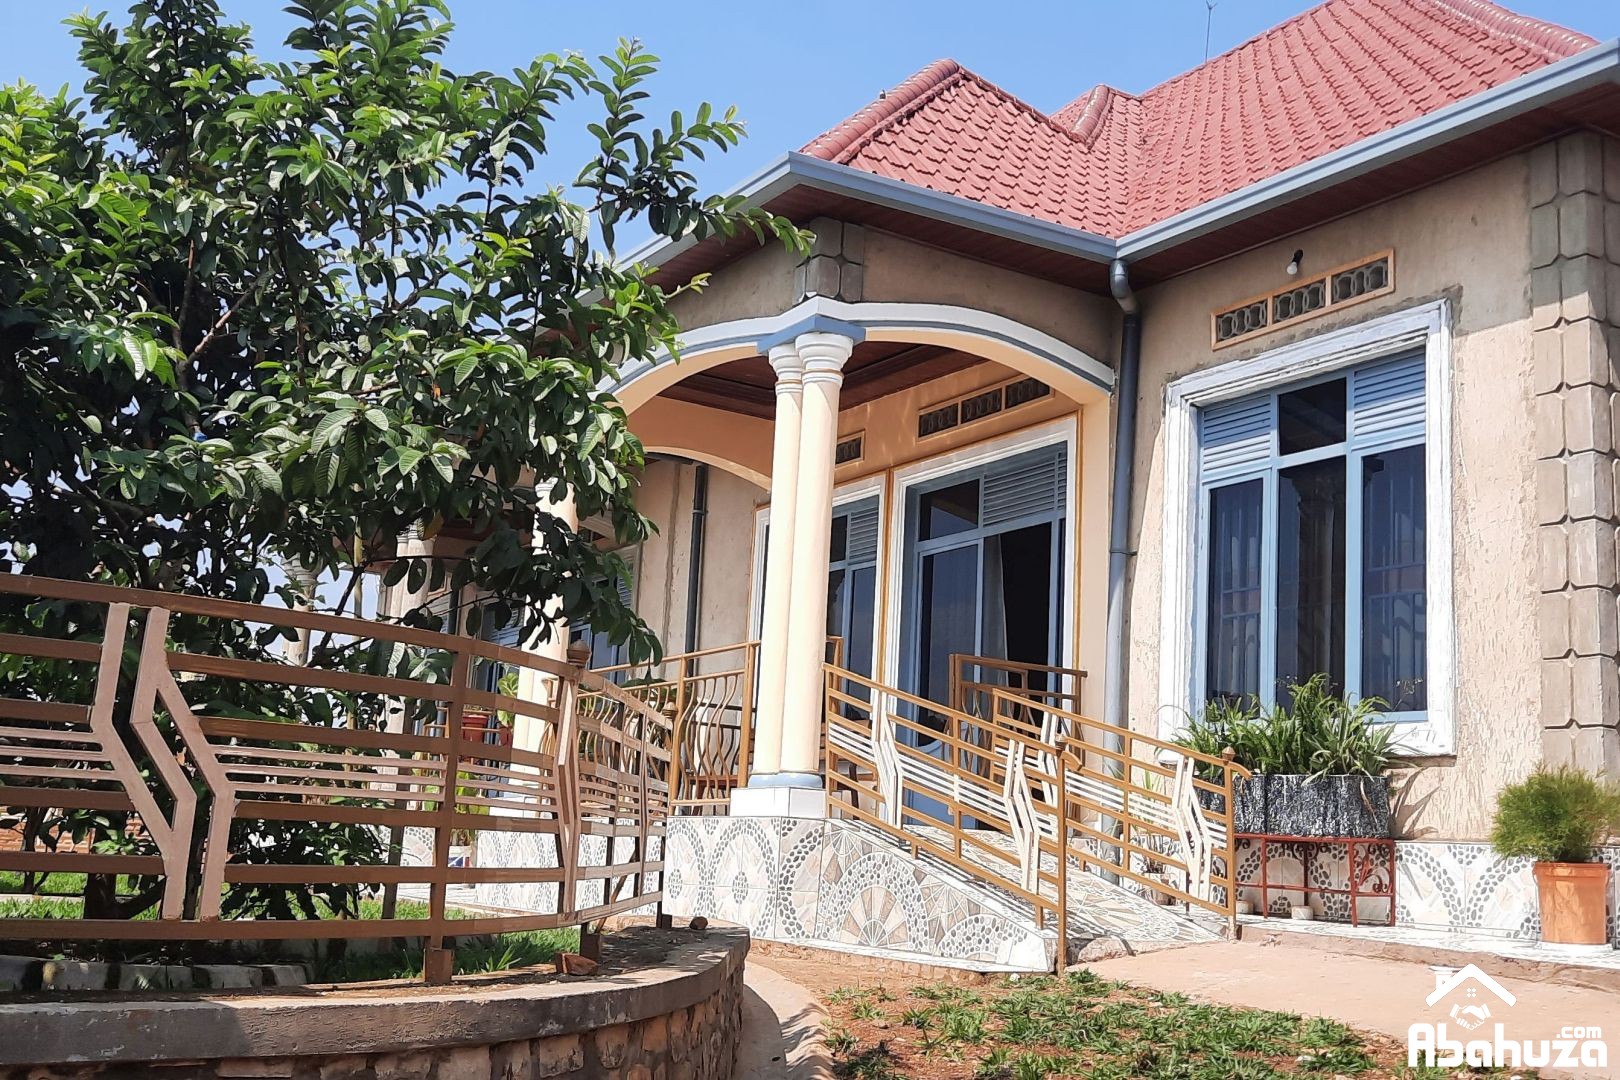 Peaceful and Breezy 3-Bedroom Apartments with Views of the Nyabarongo River Basin, in Kigali